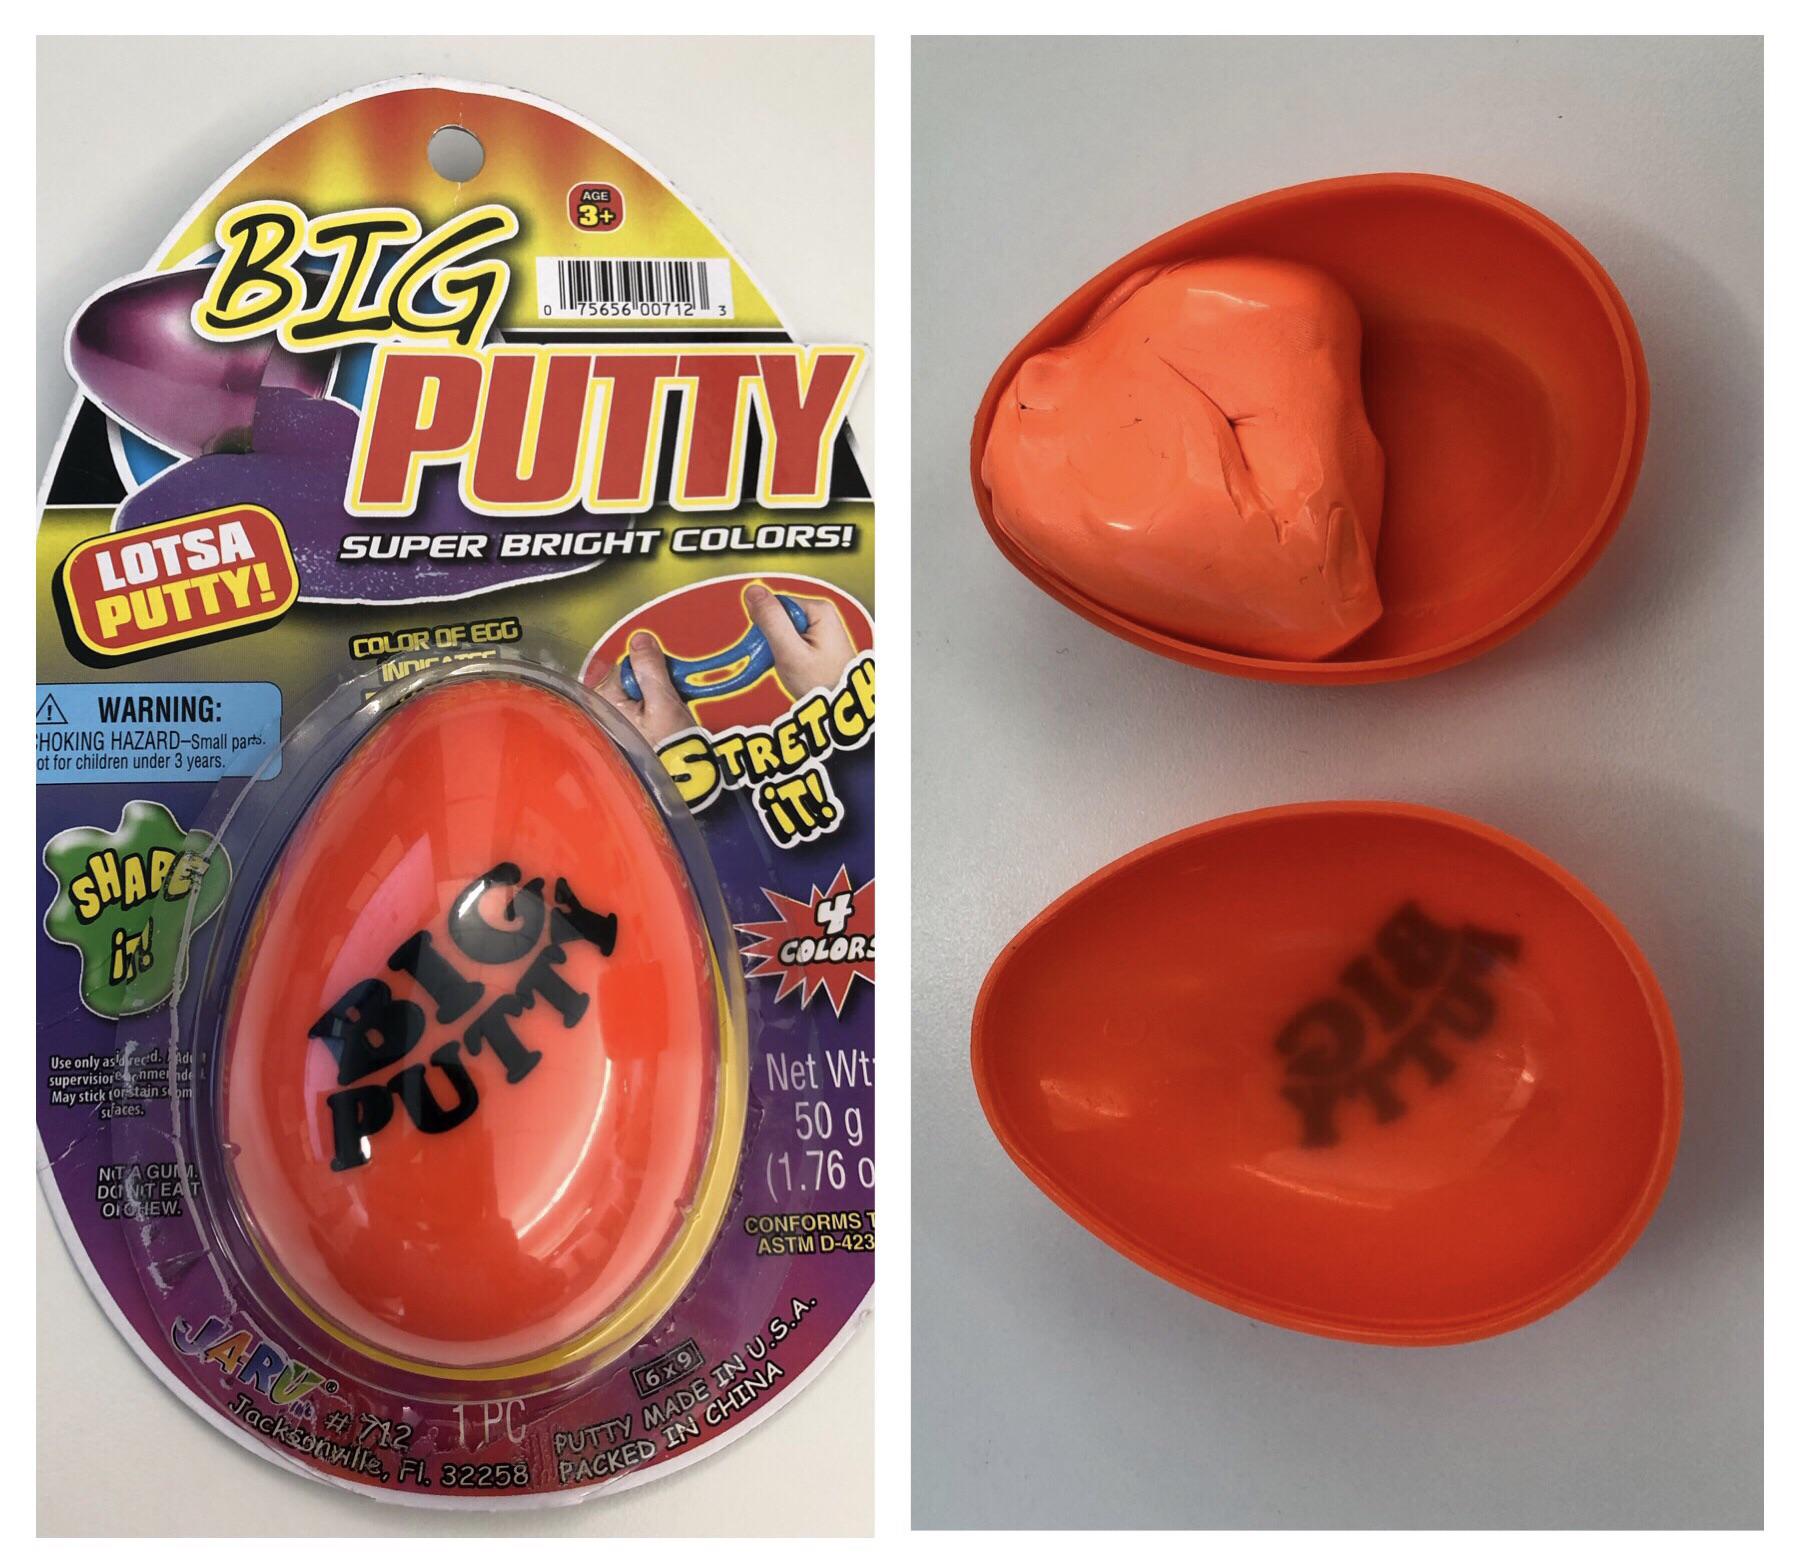 orange - Age 3 Big Bandai. o 175656 00712 Putty Super Bright Colors! Lotsa Putty! Color Of Egg Warning Choking Hazard Small parts. Not for children under 3 years